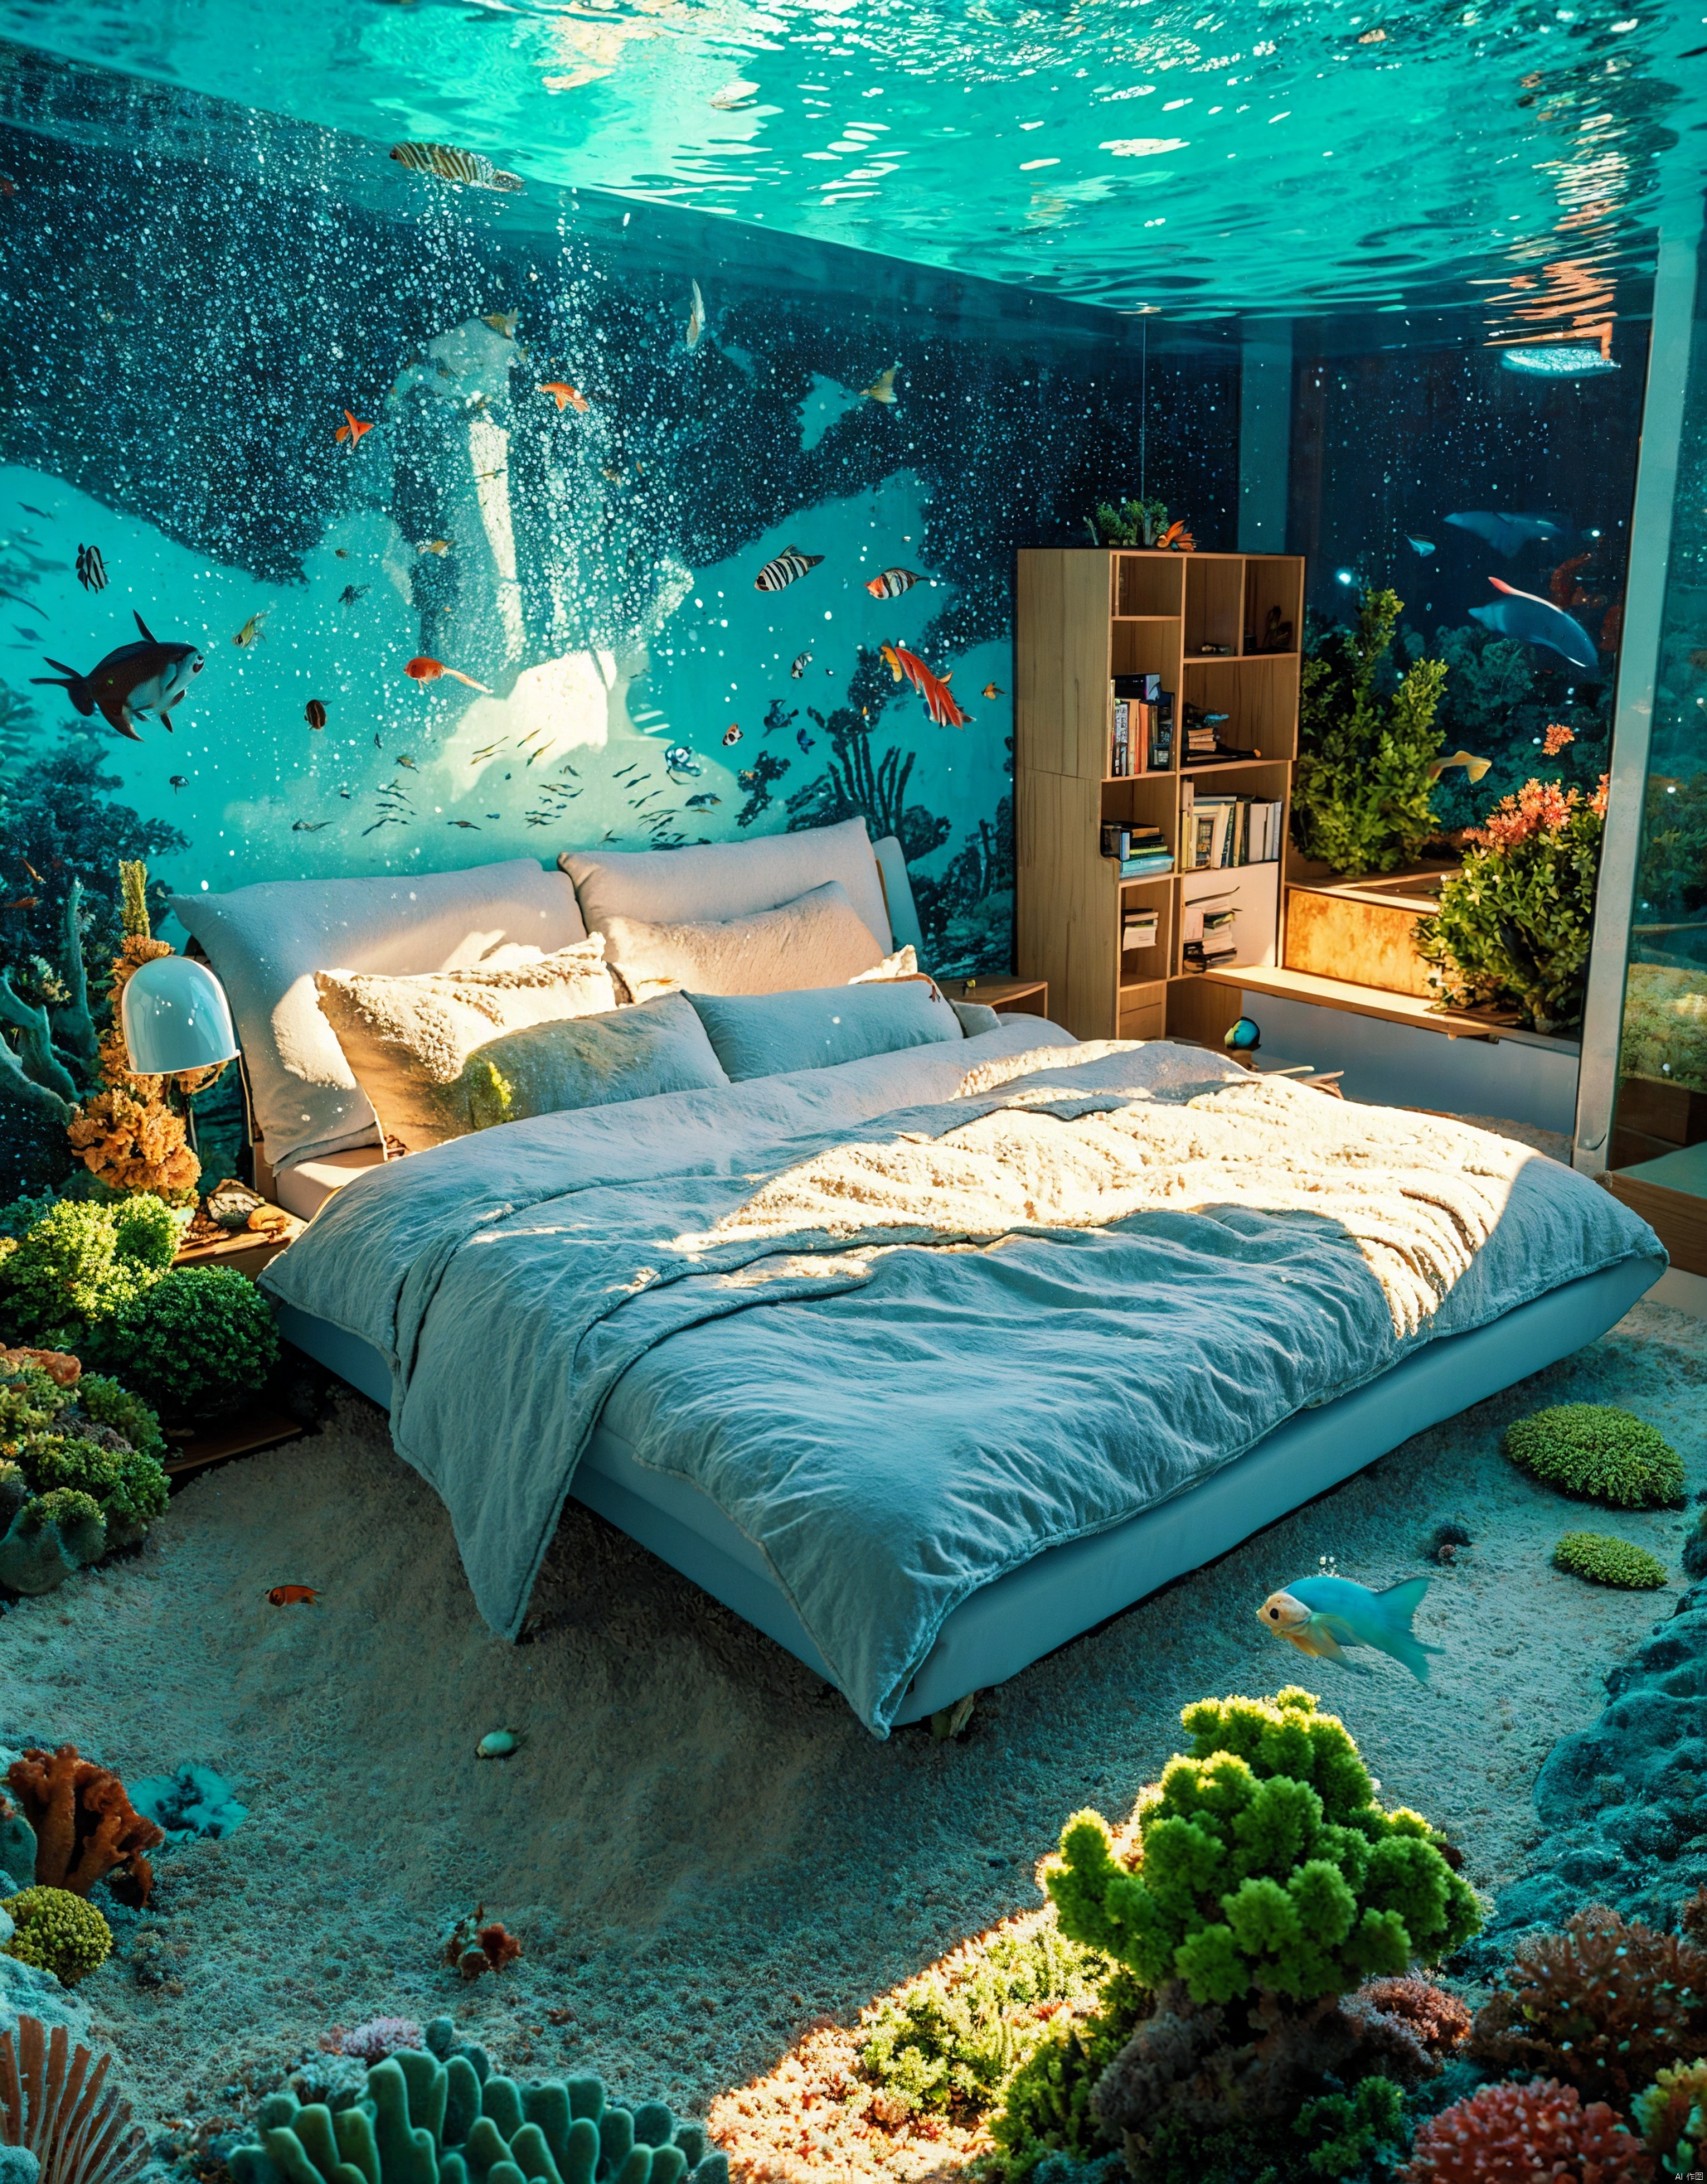  The seafloor, Sofa, living room, walls and ceiling are made of transparent bubbles, and colorful corals and swimming fish can be clearly seen outside. Indoor shell decoration sofa, and decorated with shells and starfish and other marine elements. The room is illuminated by soft blue light, creating a mysterious and serene atmosphere, high quality all over Takashimizu lower bedroom with marine elements, vivid coral reefs and a variety of marine life, intricate details, and a lovely view of the ocean, clear focus, realism, 3D illustrations by Greg Rutkowski, trends in ArtStation, CGSociety, conceptual art for fantasy underwater homes, serene surroundings, detailed ocean decor, atmospheric lighting, best viewed in widescreen format.